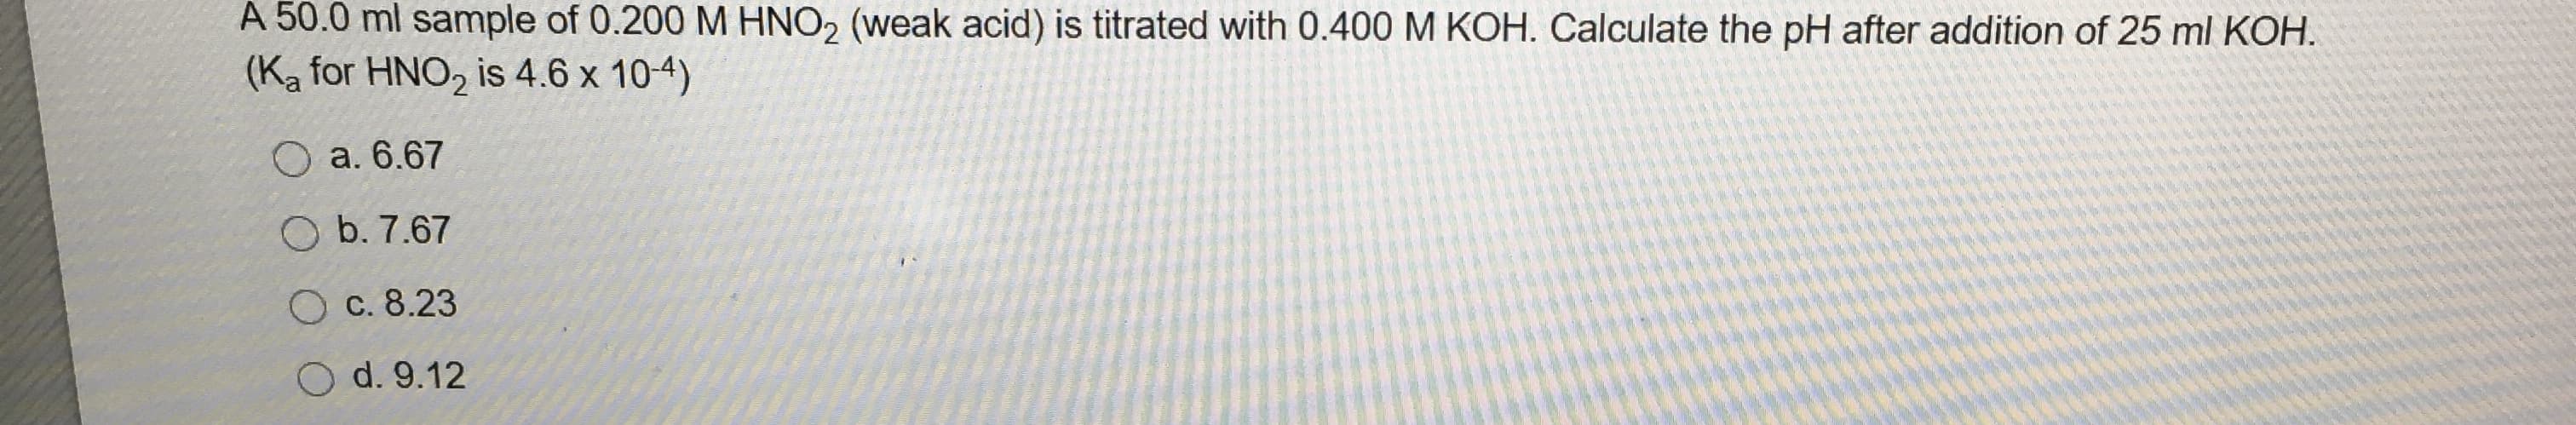 A 50.0 ml sample of 0.200 M HNO2 (weak acid) is titrated with 0.400 M KOH. Calculate the pH after addition of 25 ml KOH.
(Ka for HNO, is 4.6 x 104)
